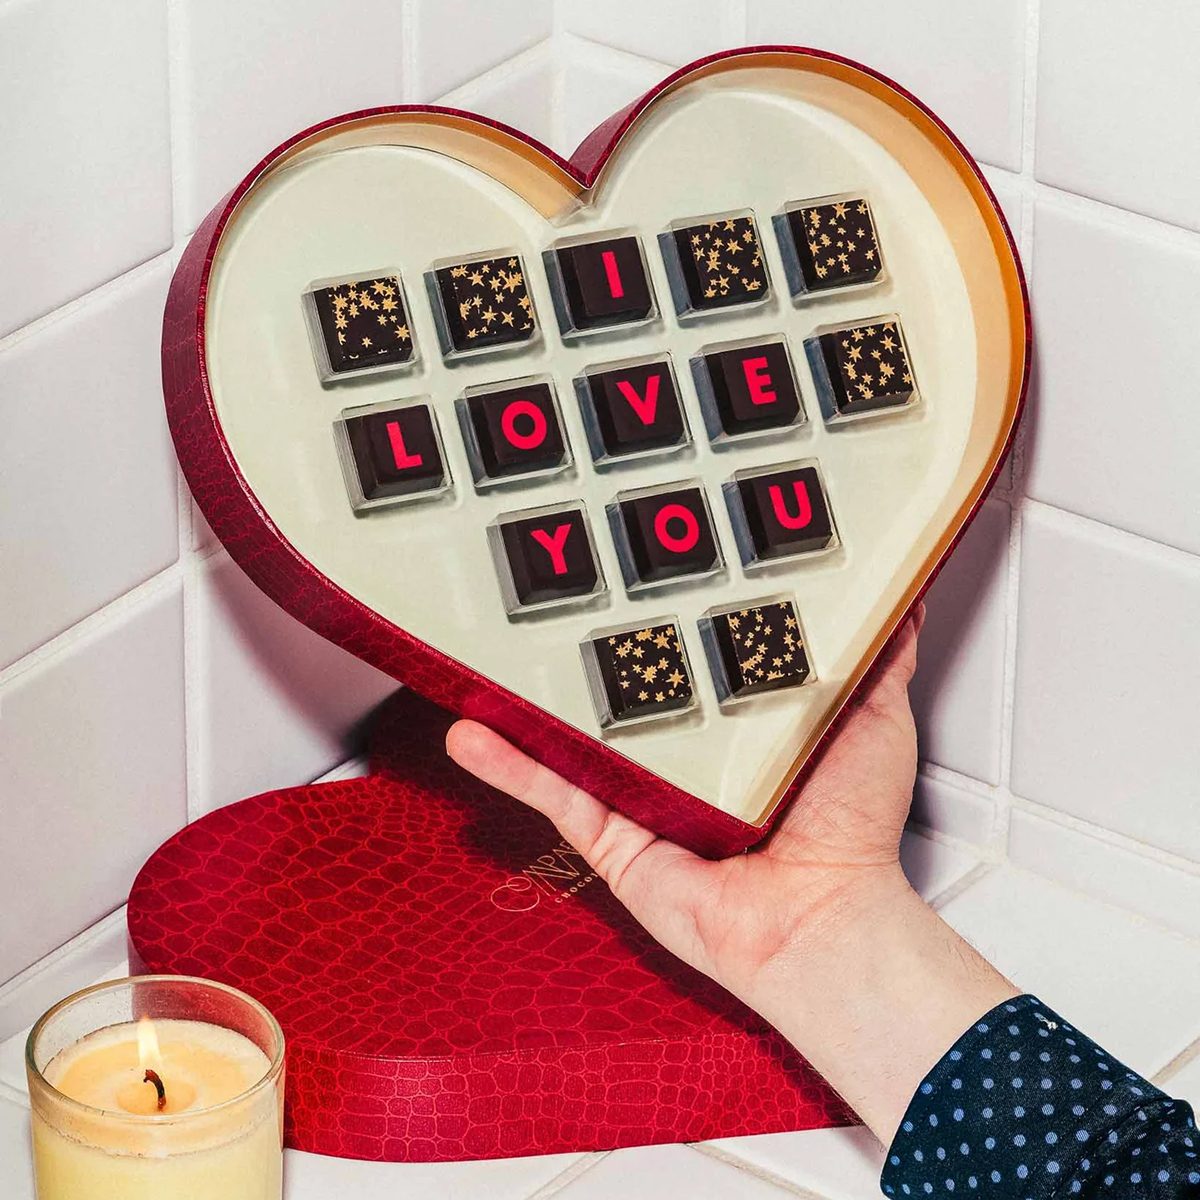 https://www.tasteofhome.com/wp-content/uploads/2024/01/I-LOVE-YOU-Valentines-Chocolate-Heart-Gift-Box_ecomm_via-compartes.com_.jpg?fit=700%2C1024